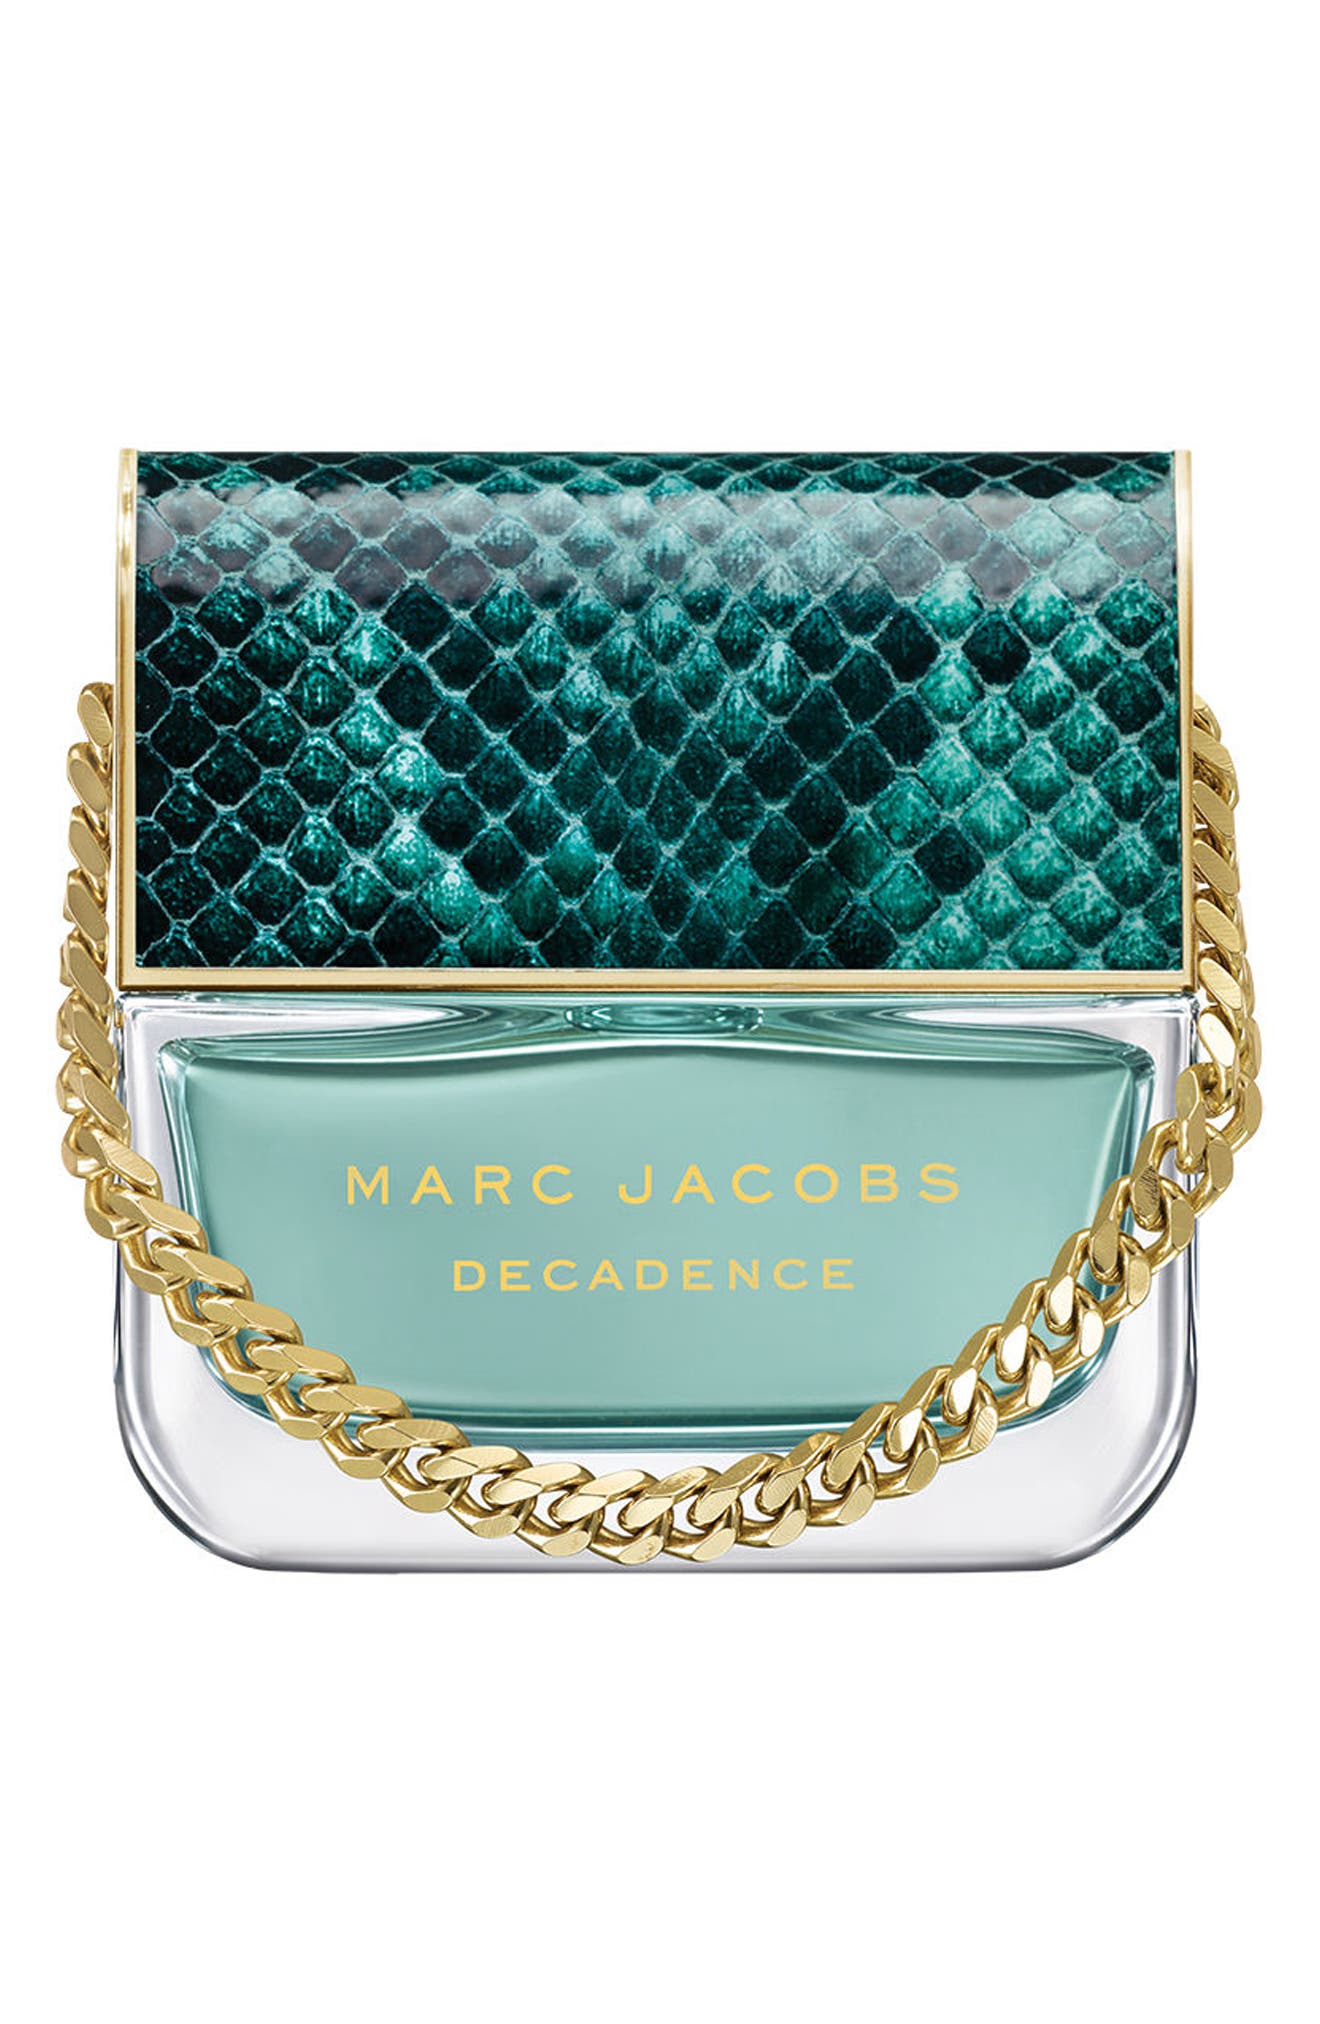 Marc Jacobs Perfume Decadence Gift Set - Marc Jacobs Divine Decadence ...